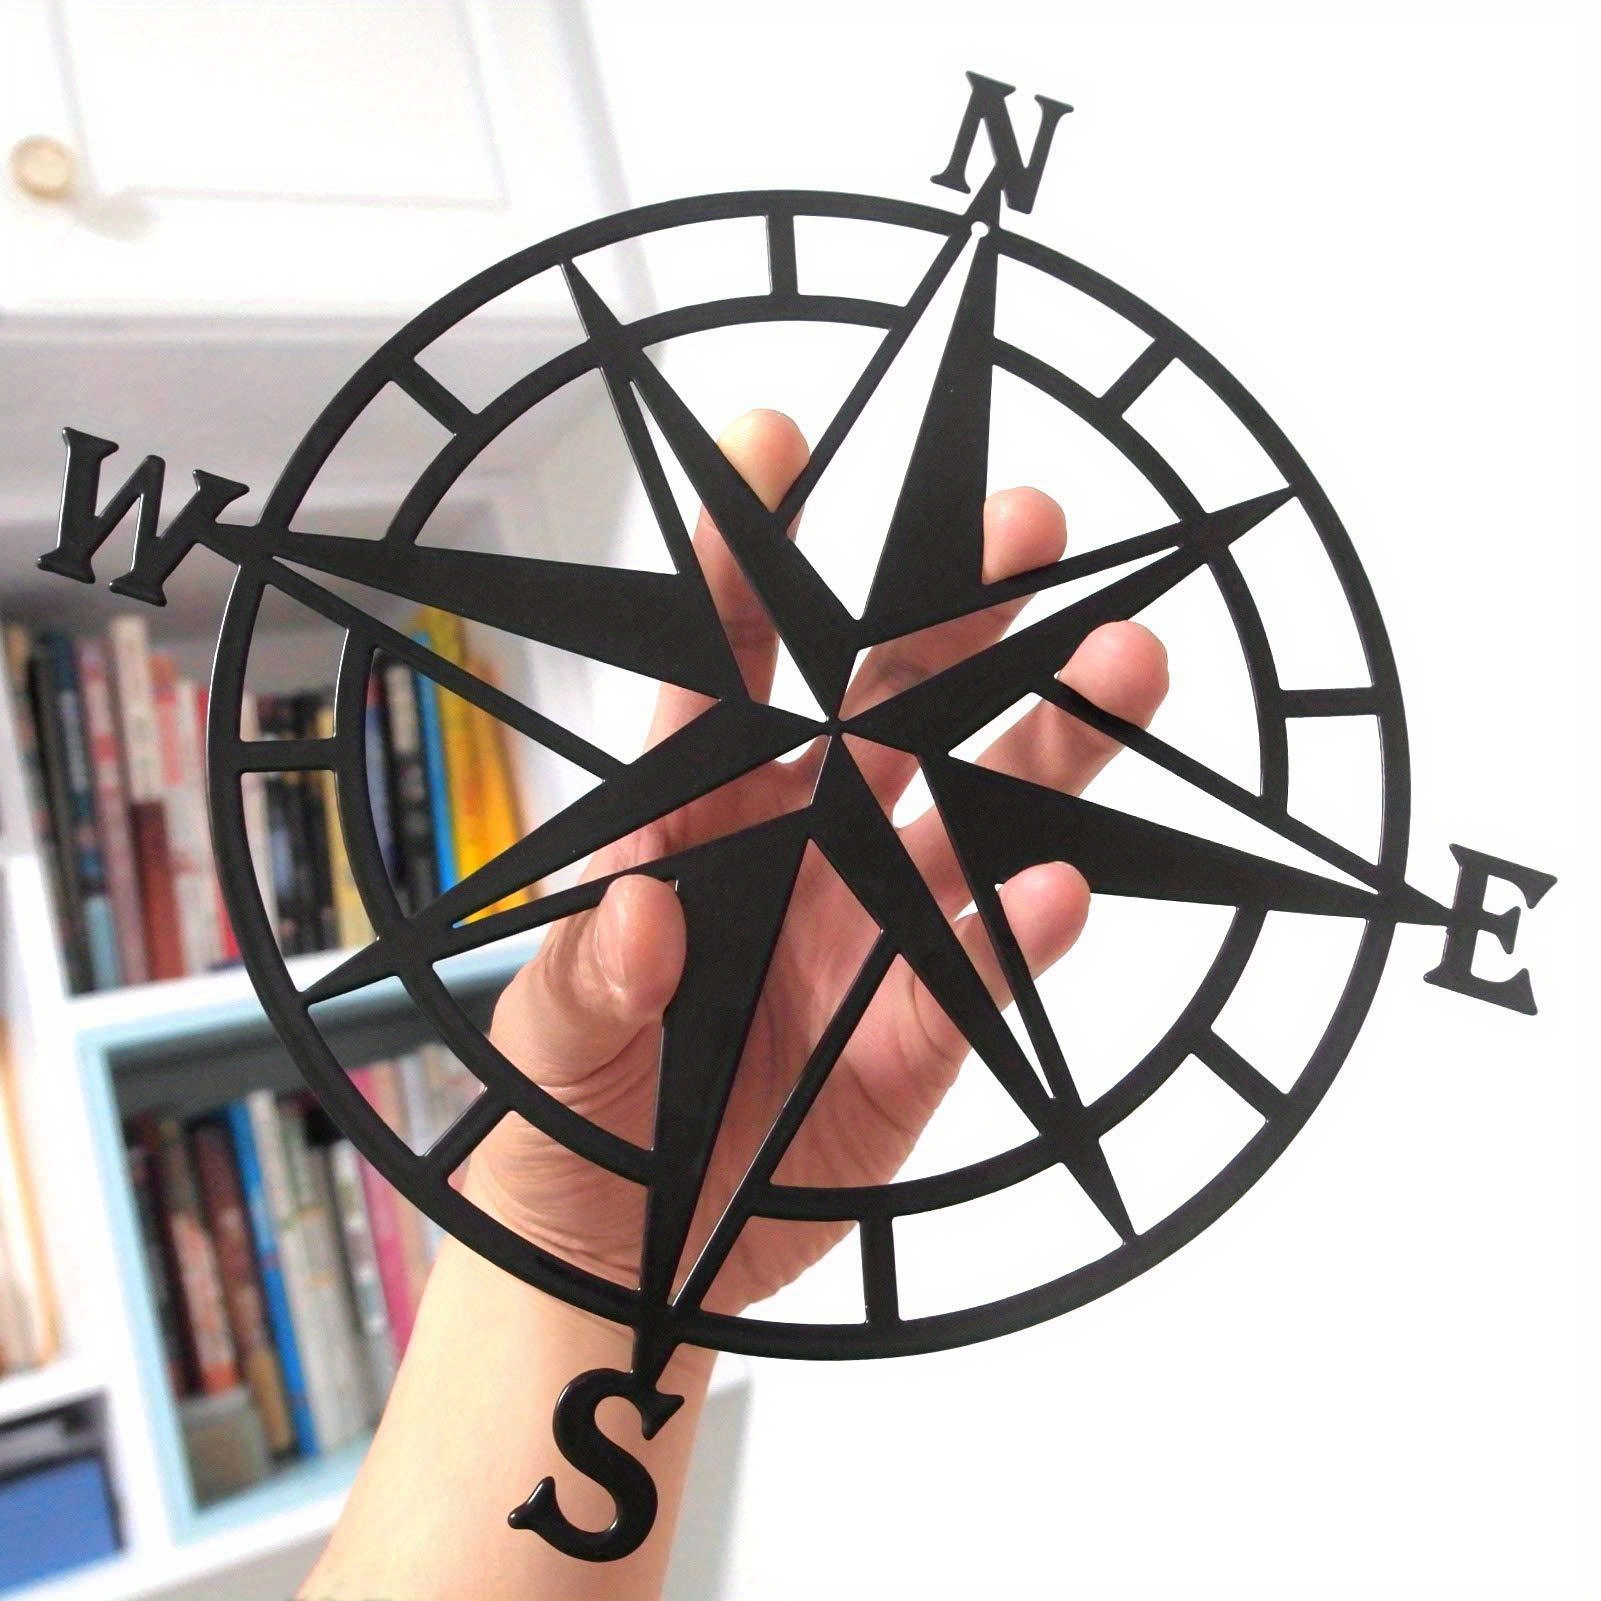 

Black Metal Decorative Nautical Compass Wall Décor, 11 Inch Ocean Theme Wall Hanging Art For Indoor And Outdoor